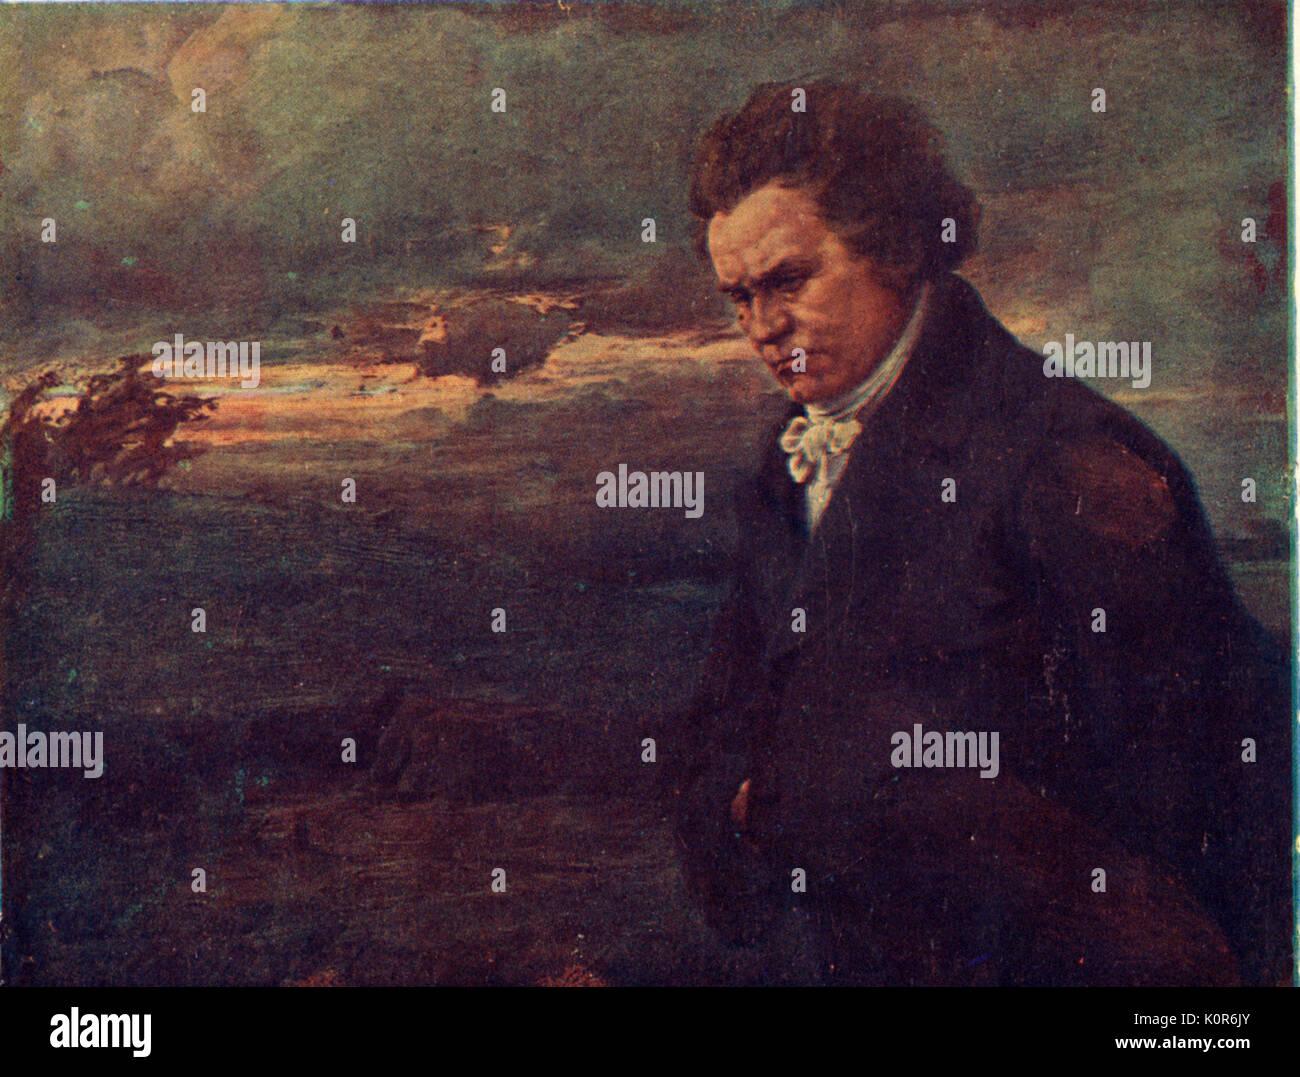 Ludwig van Beethoven brooding against country night background. Portrait  by Woolf. German composer (1770-1827). Stock Photo